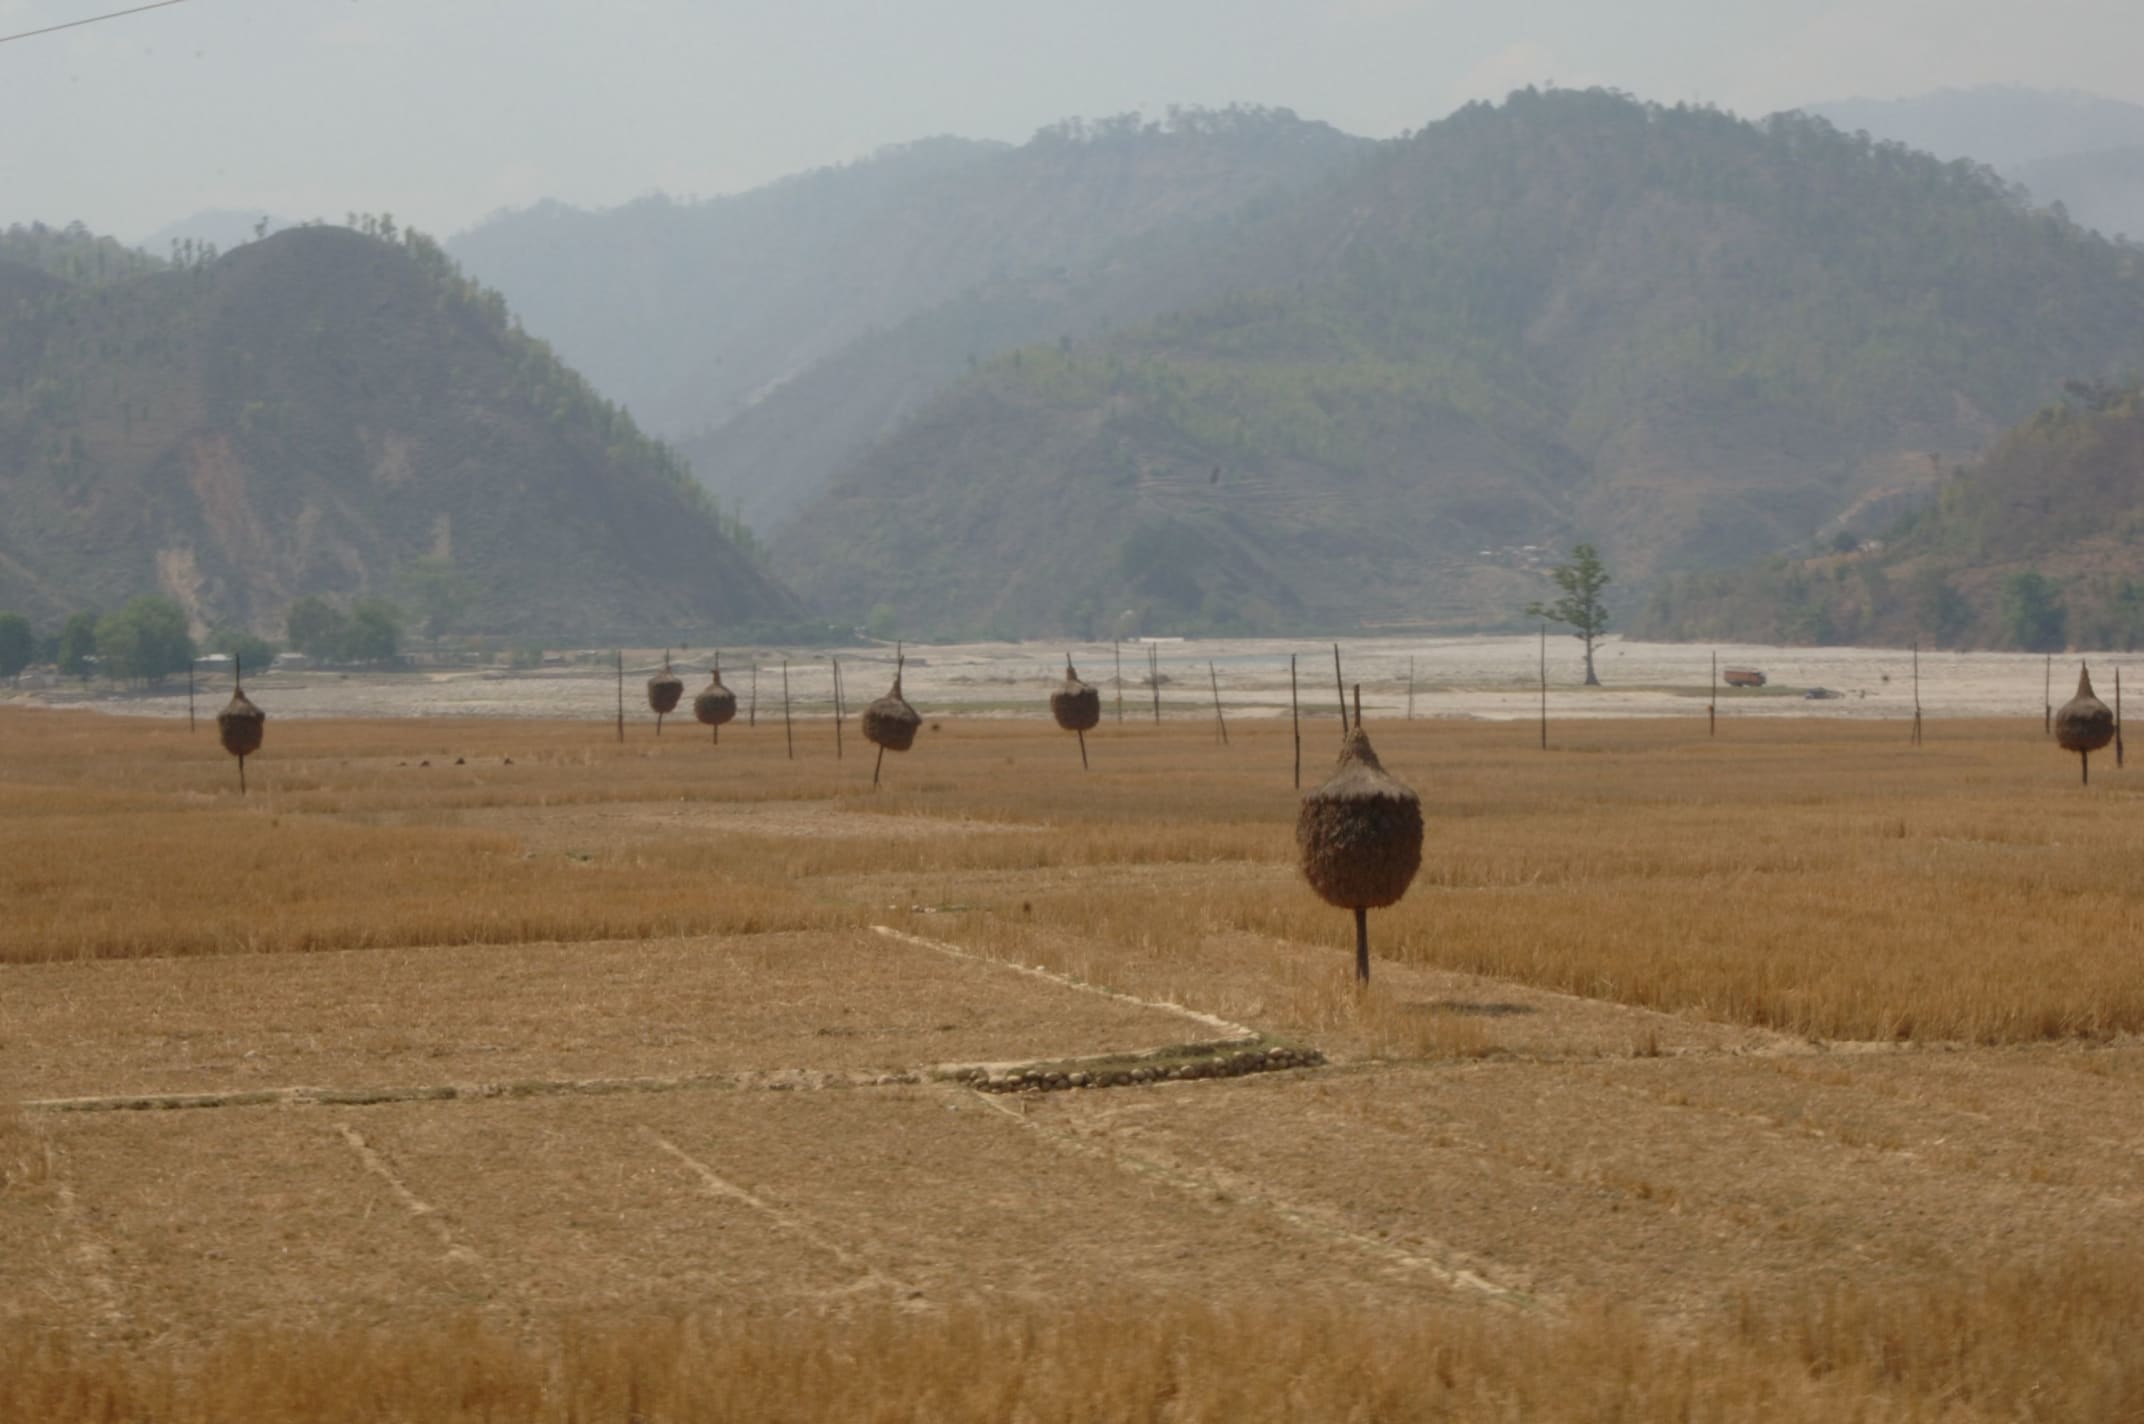 Farmed fields with harvested crops in Nepal